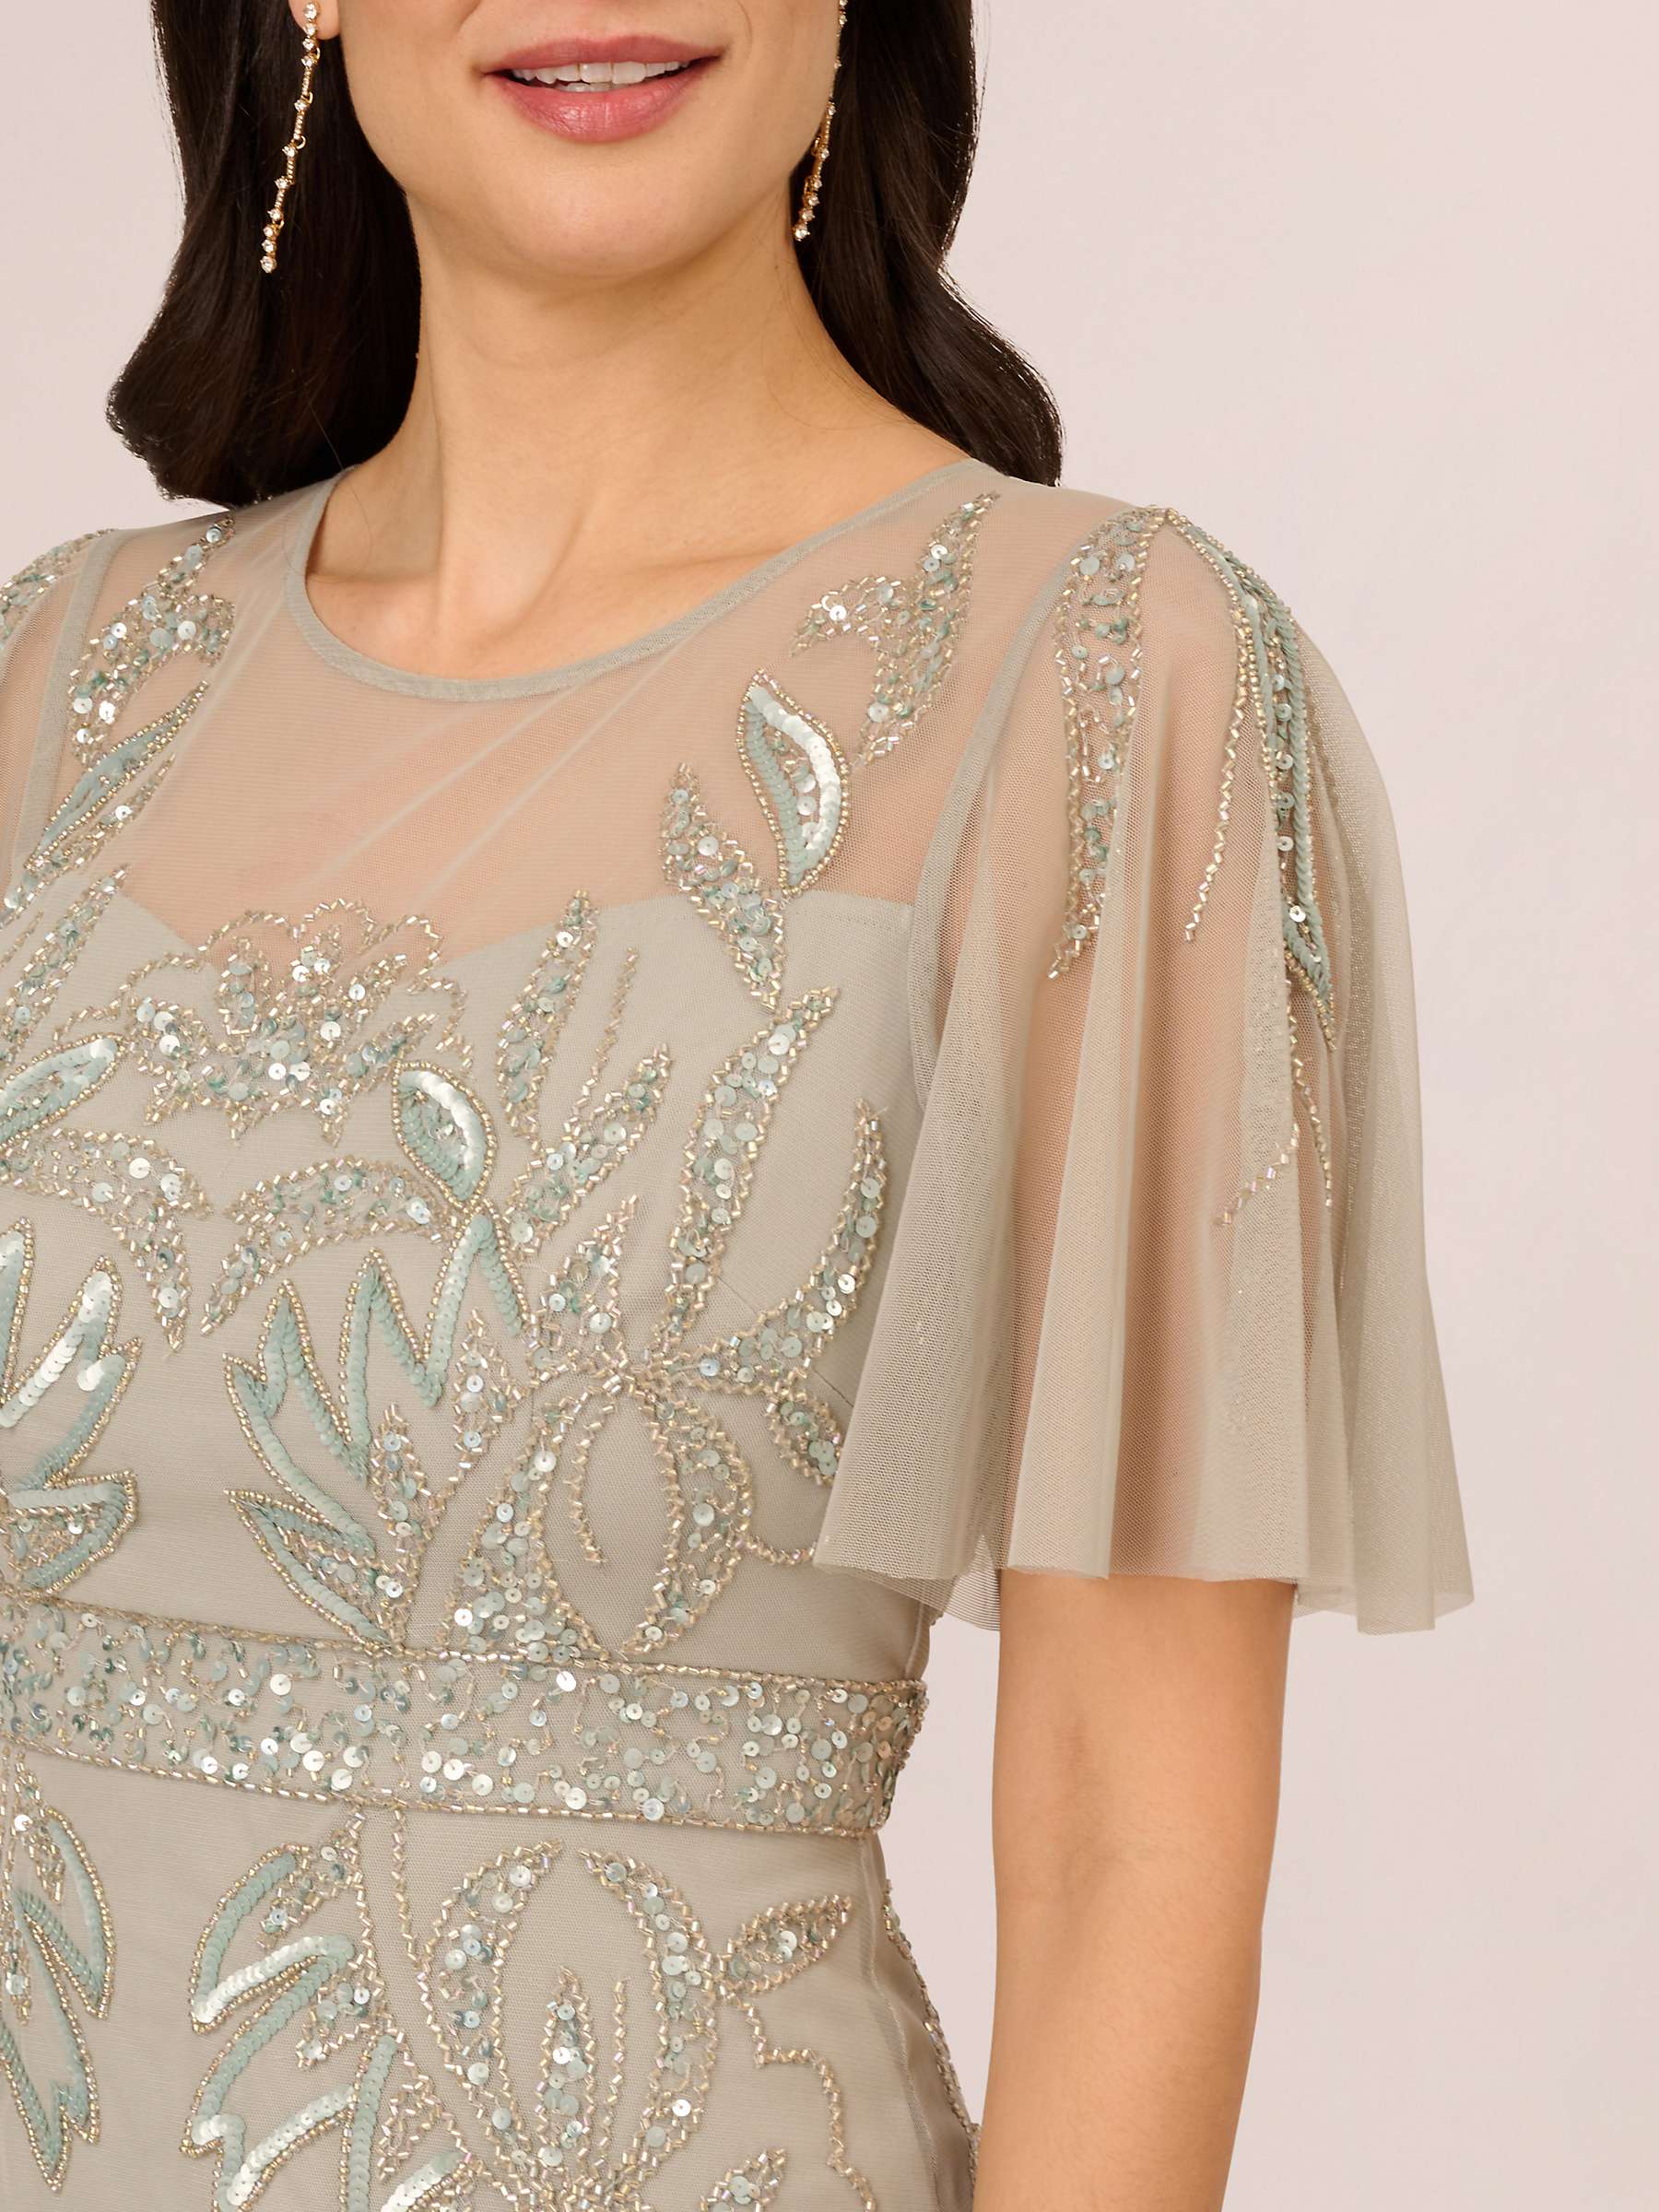 Buy Adrianna Papell Papell Studio Beaded Cocktail Dress, Frosted Sage Online at johnlewis.com